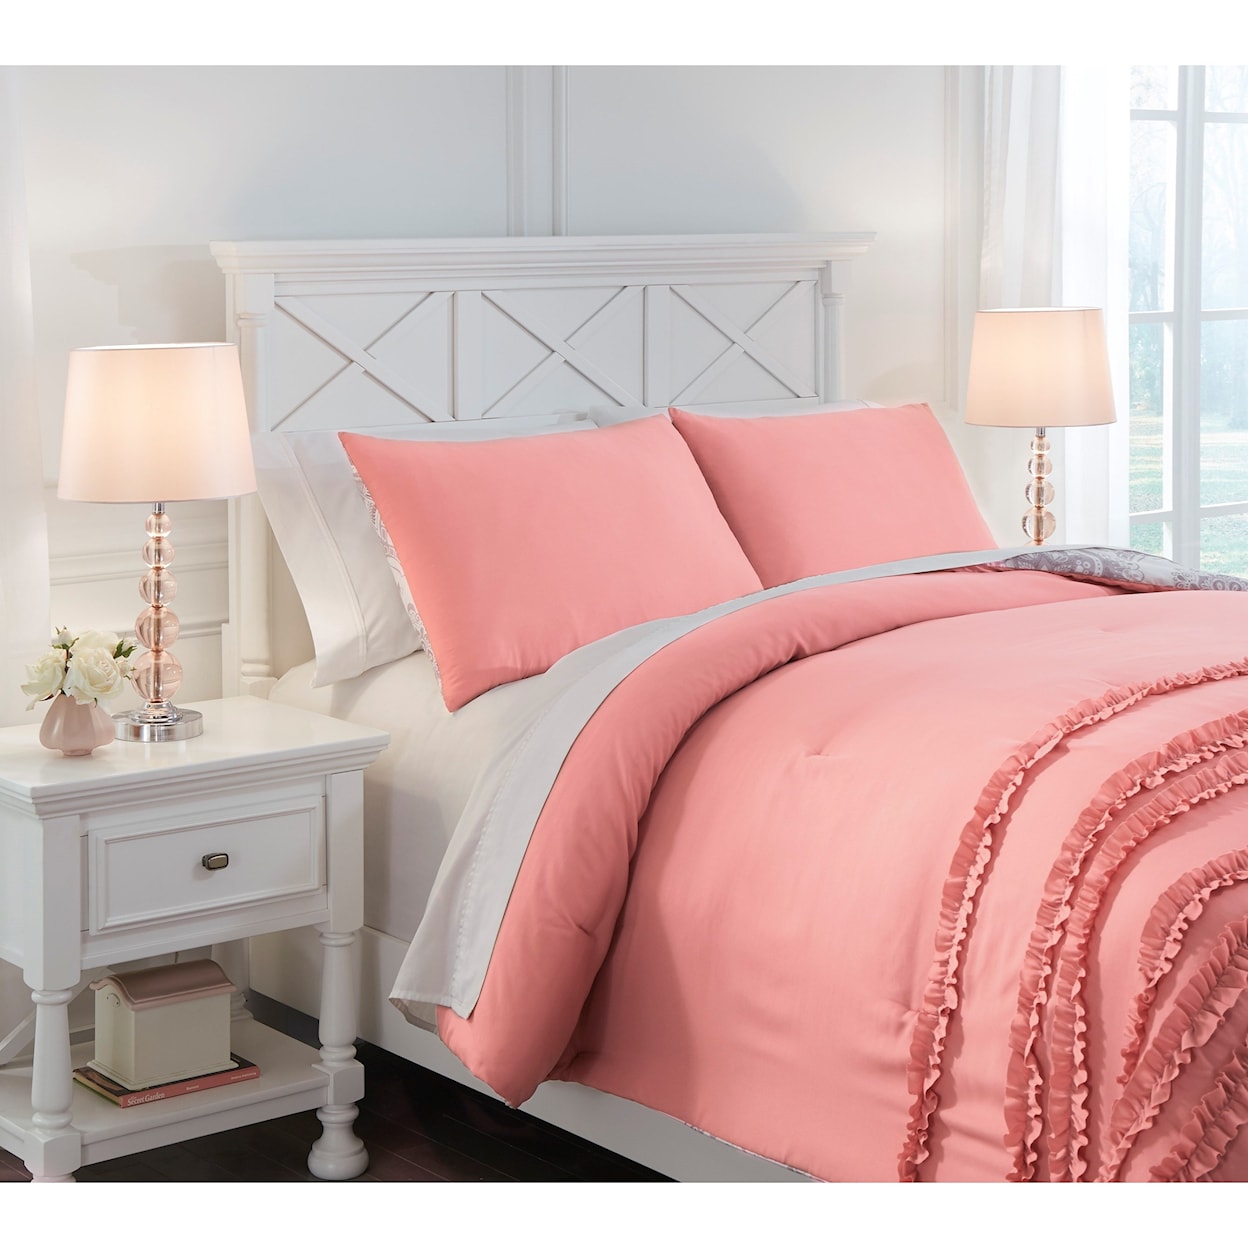 Signature Design by Ashley Bedding Sets Full Avaleigh Pink/White/Gray Comforter Set